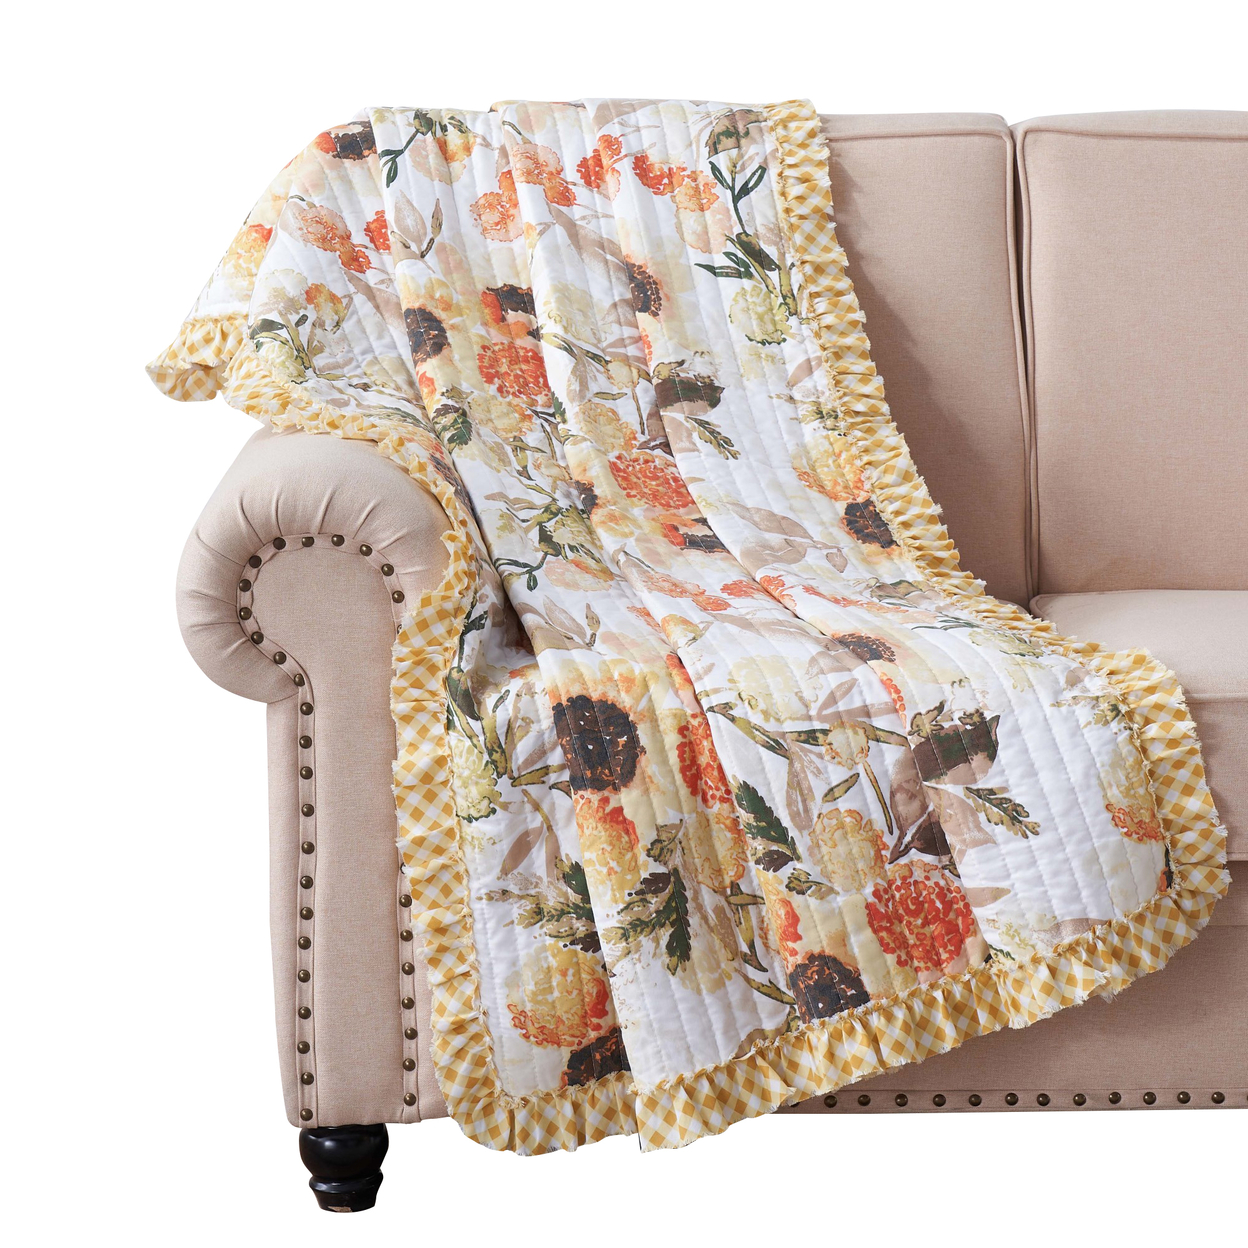 Kelsa 50 X 60 Channel Quilted Throw Blanket, Cotton Fill, Gold Sunflowers- Saltoro Sherpi